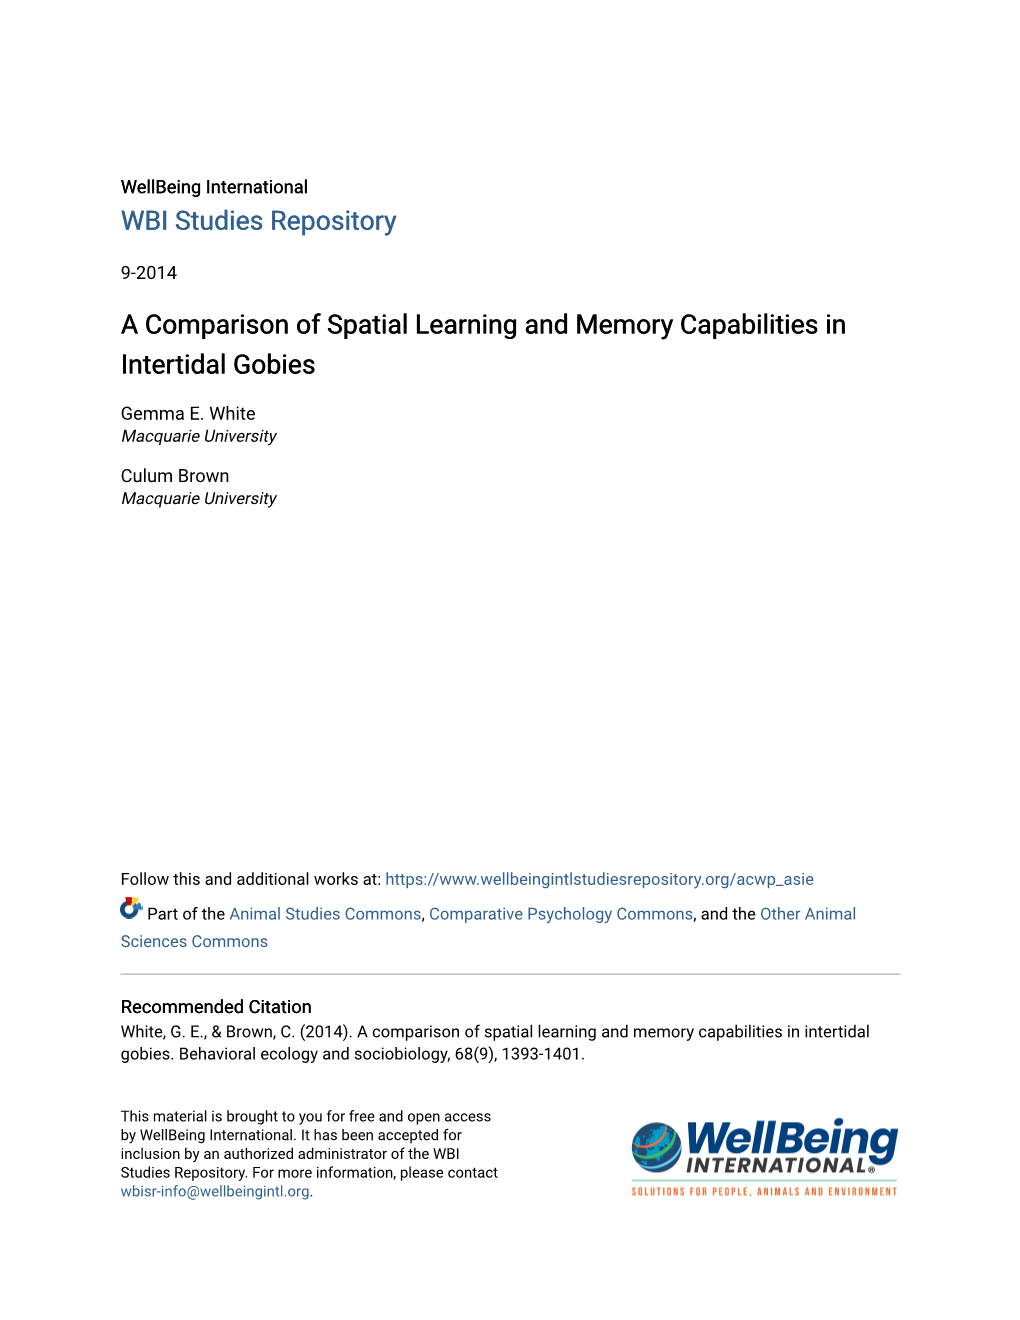 A Comparison of Spatial Learning and Memory Capabilities in Intertidal Gobies